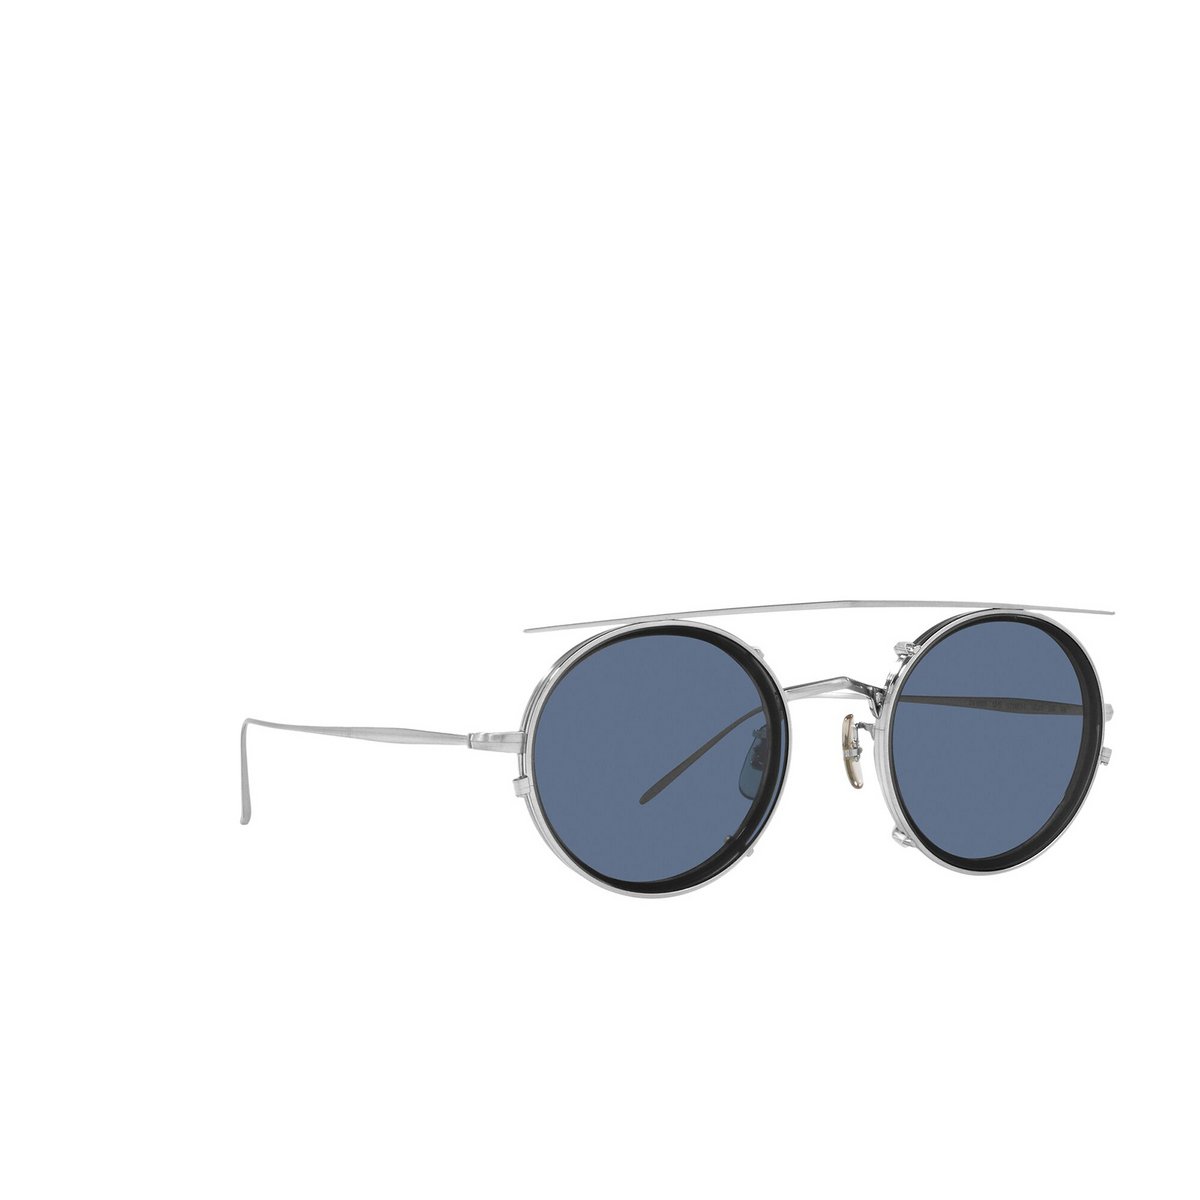 Oliver Peoples® Round Sunglasses: G. Ponti-2 OV1292T color Brushed Chrome 5315 - three-quarters view.